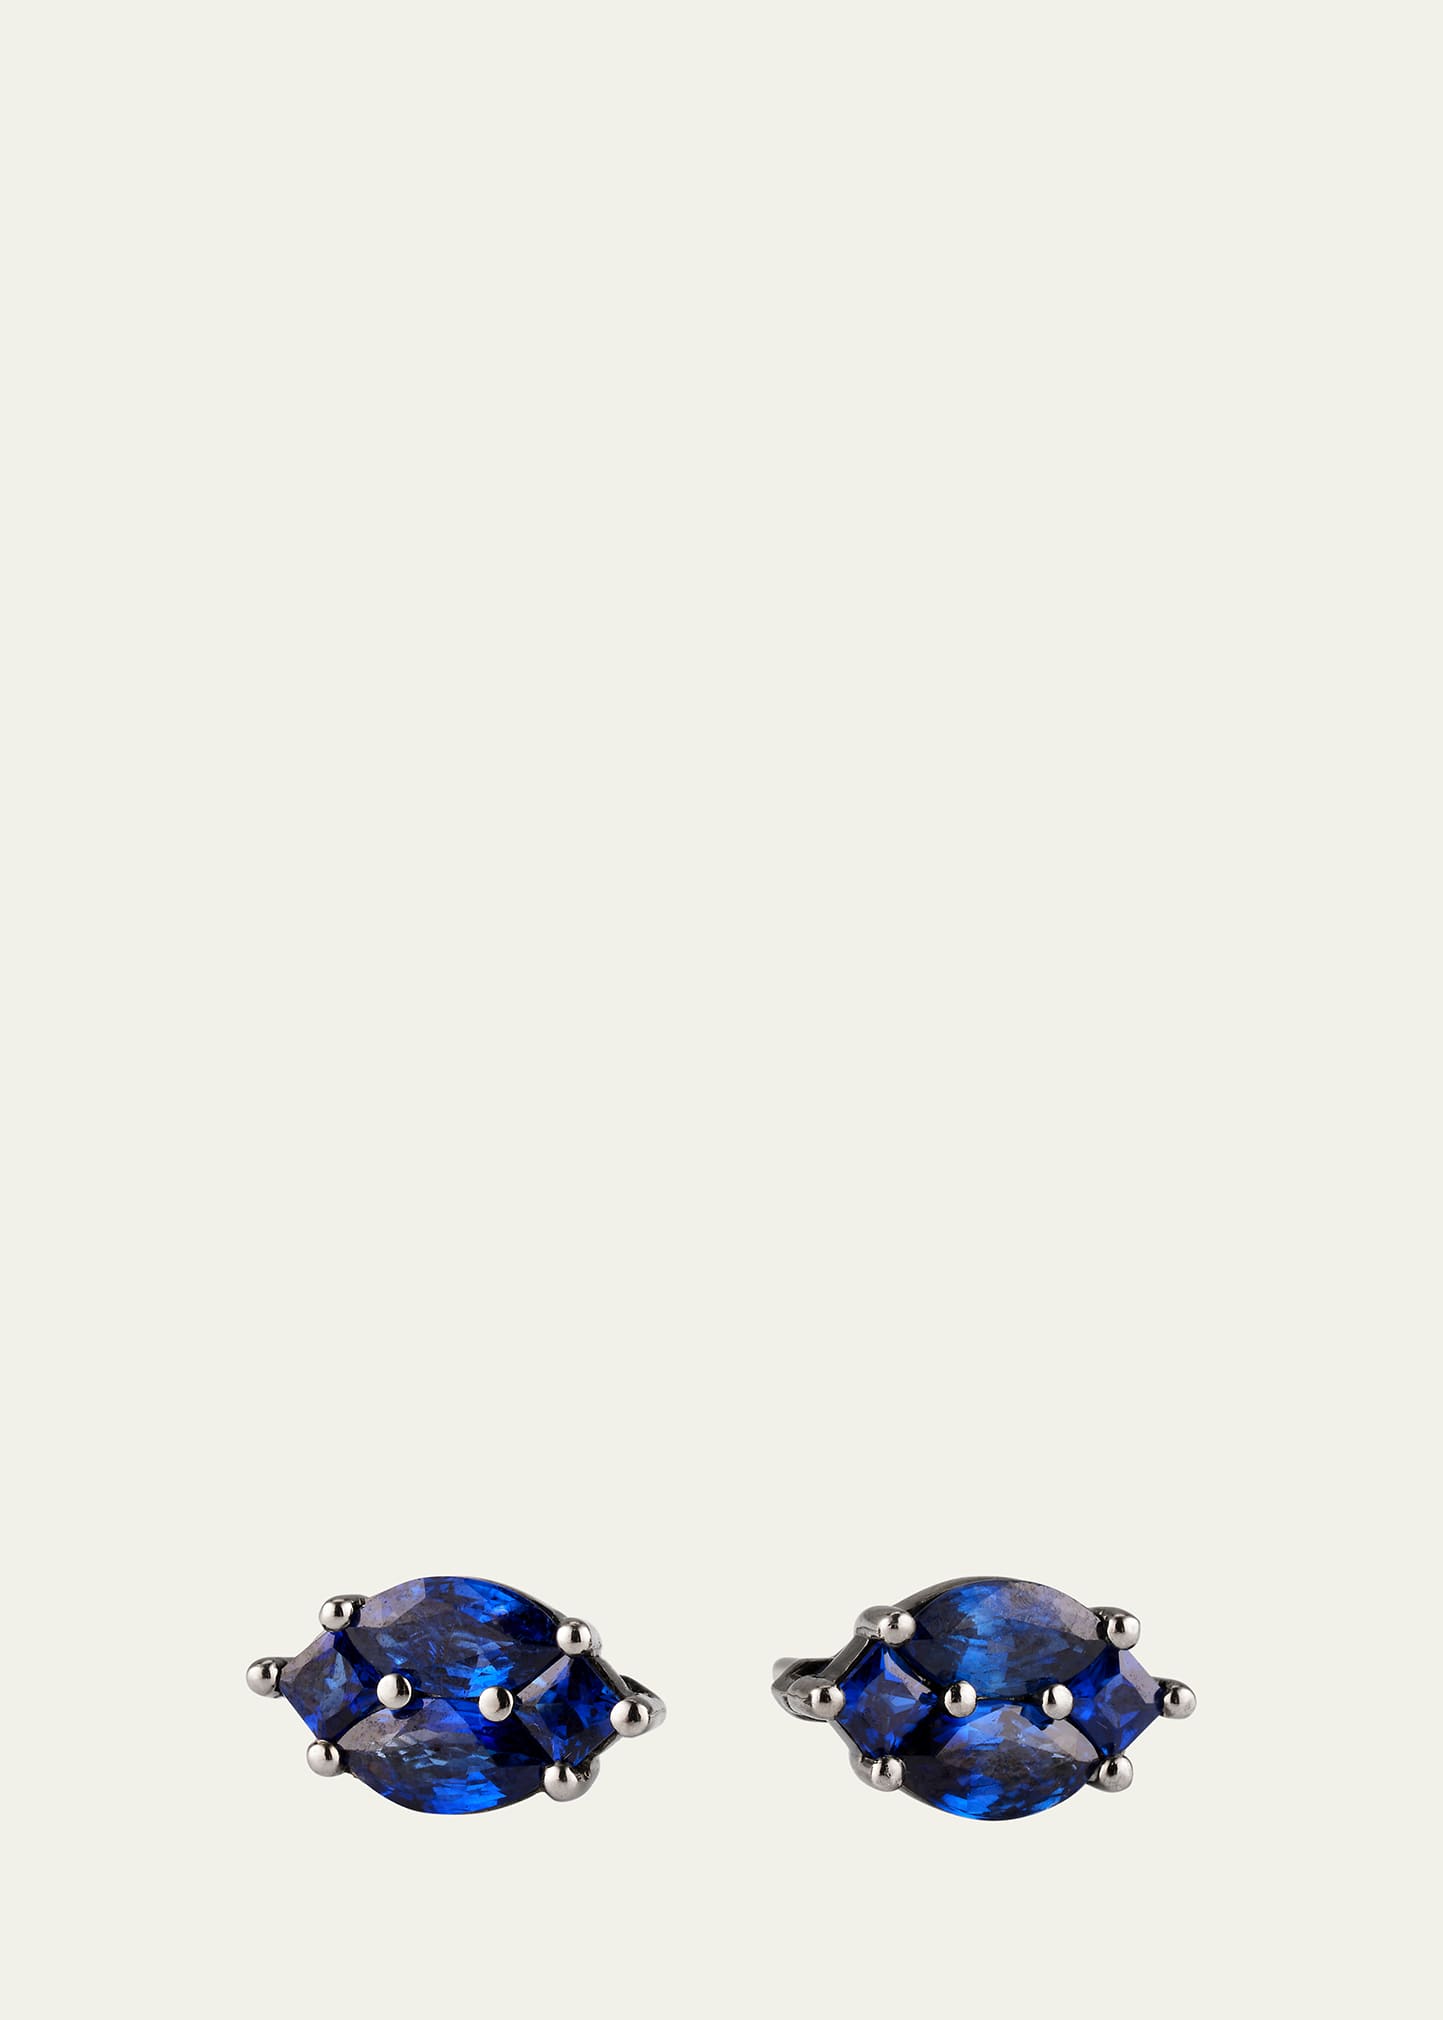 18k White Gold With Black Rhodium Extra Large Stud Earrings With Blue Sapphire